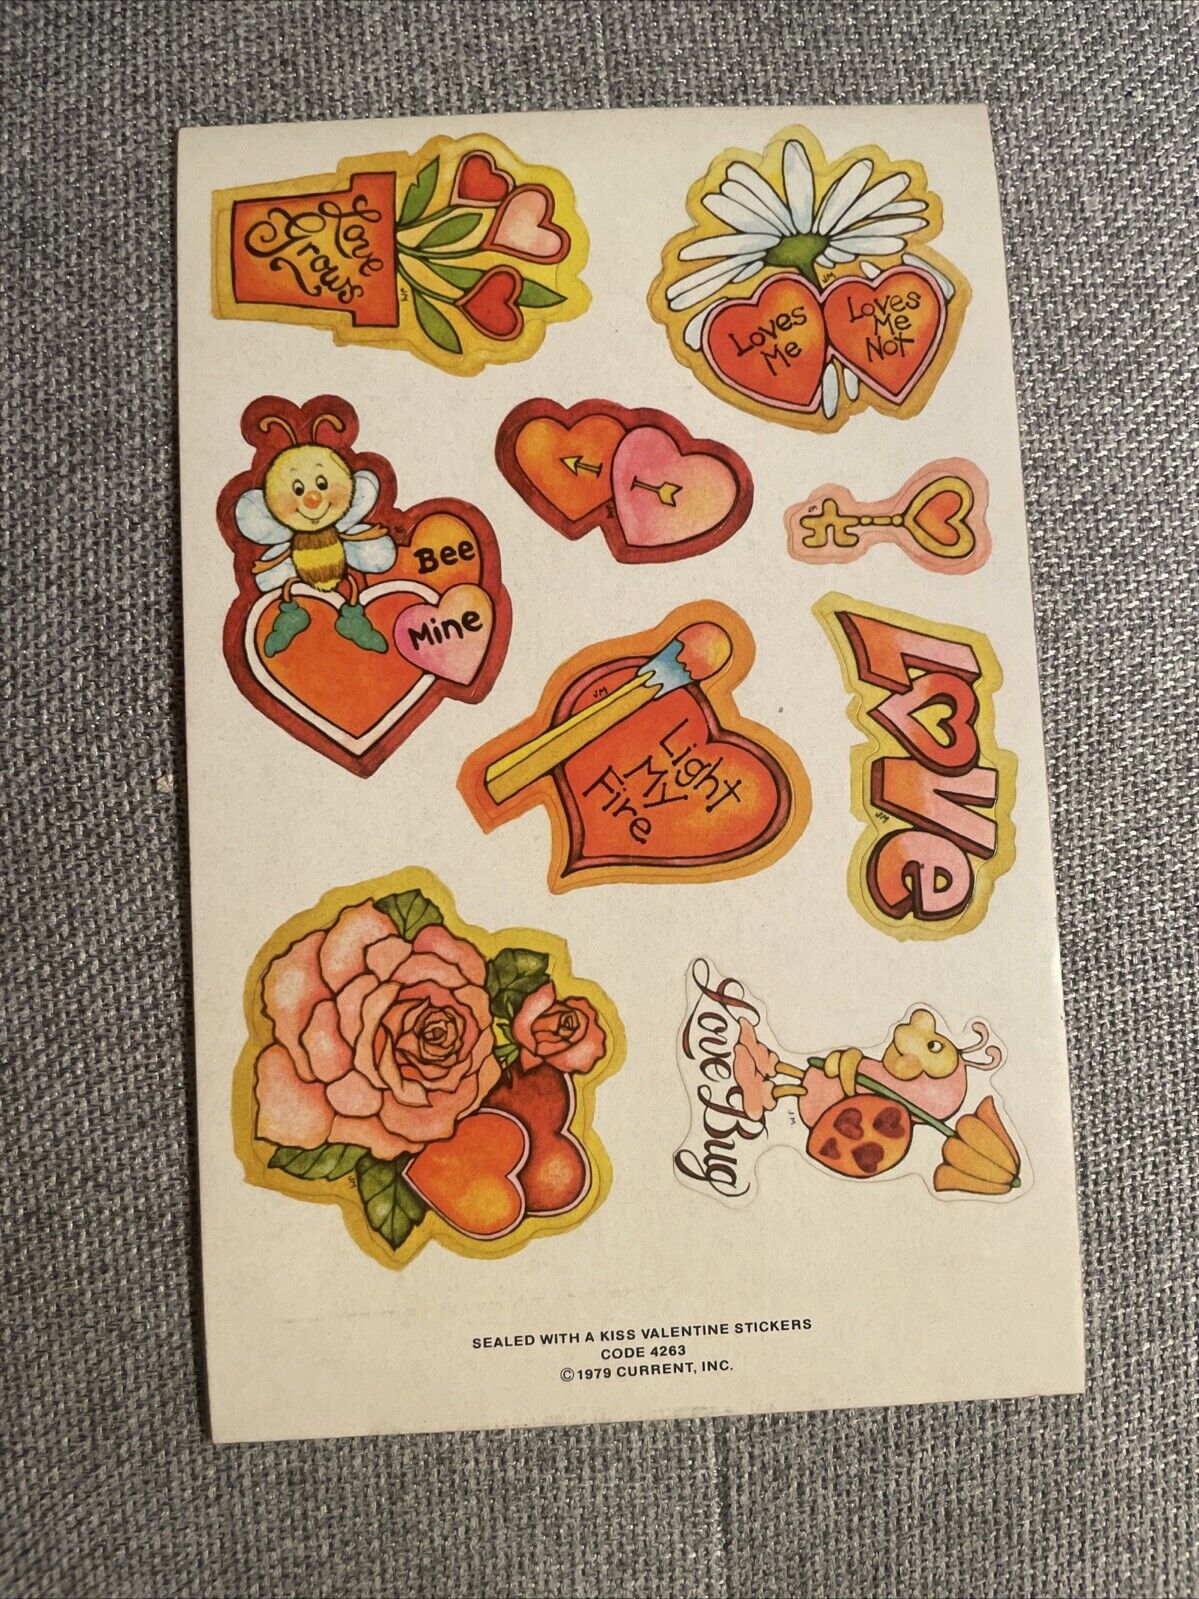 NEW VINTAGE SEALED WITH A KISS VALENTINE STICKERS 1979 CURRENT 1 SHEET